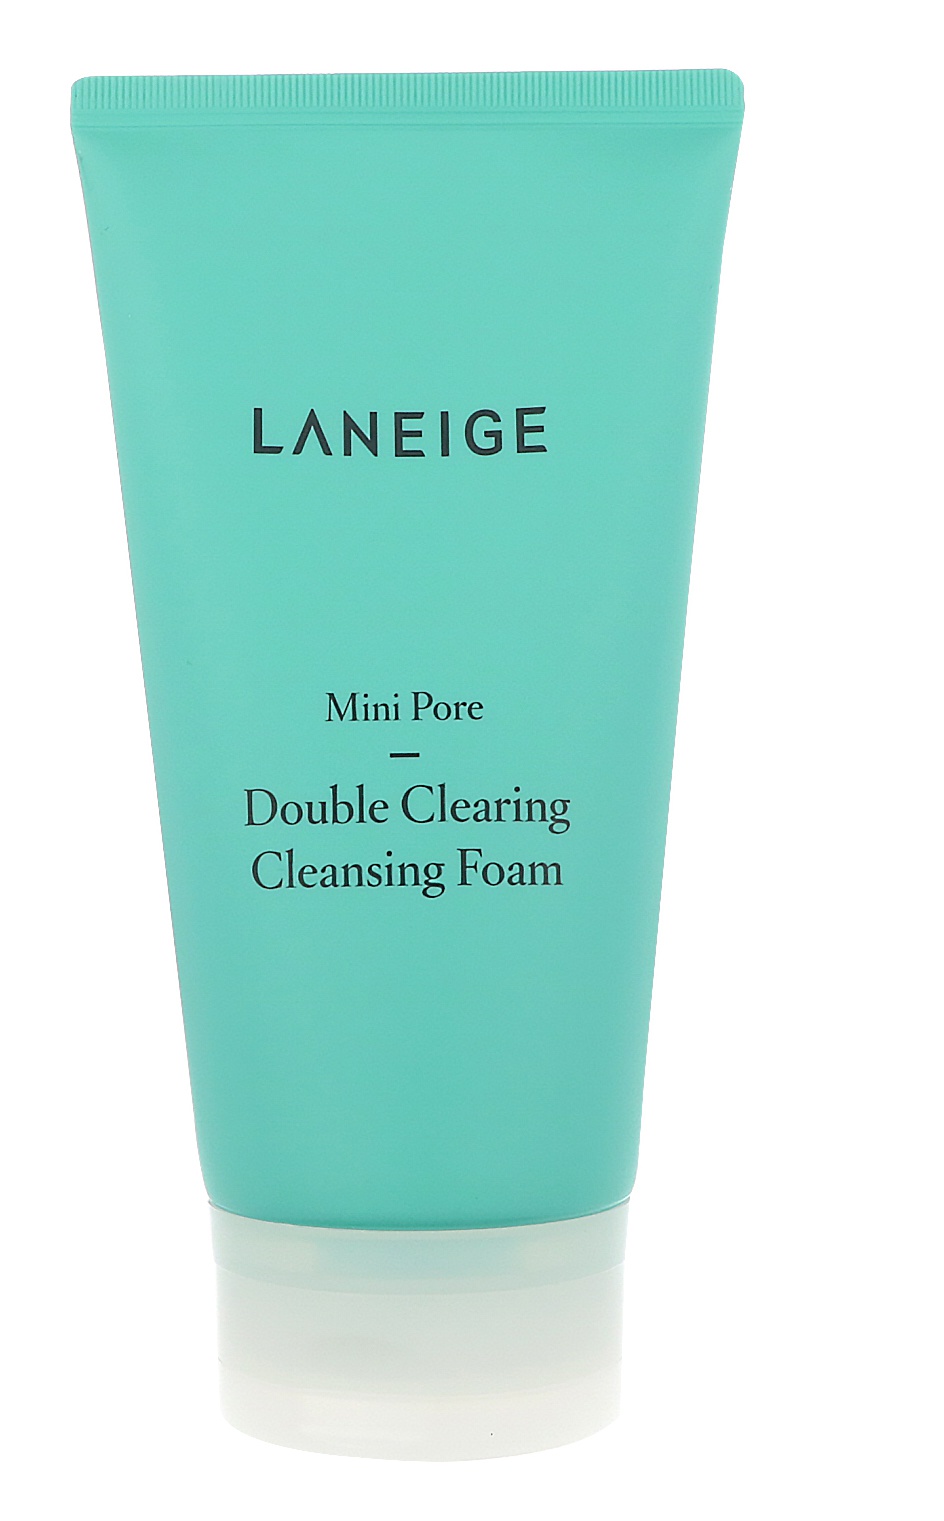 LANEIGE Mini Pore Double Clearing Cleansing Foam